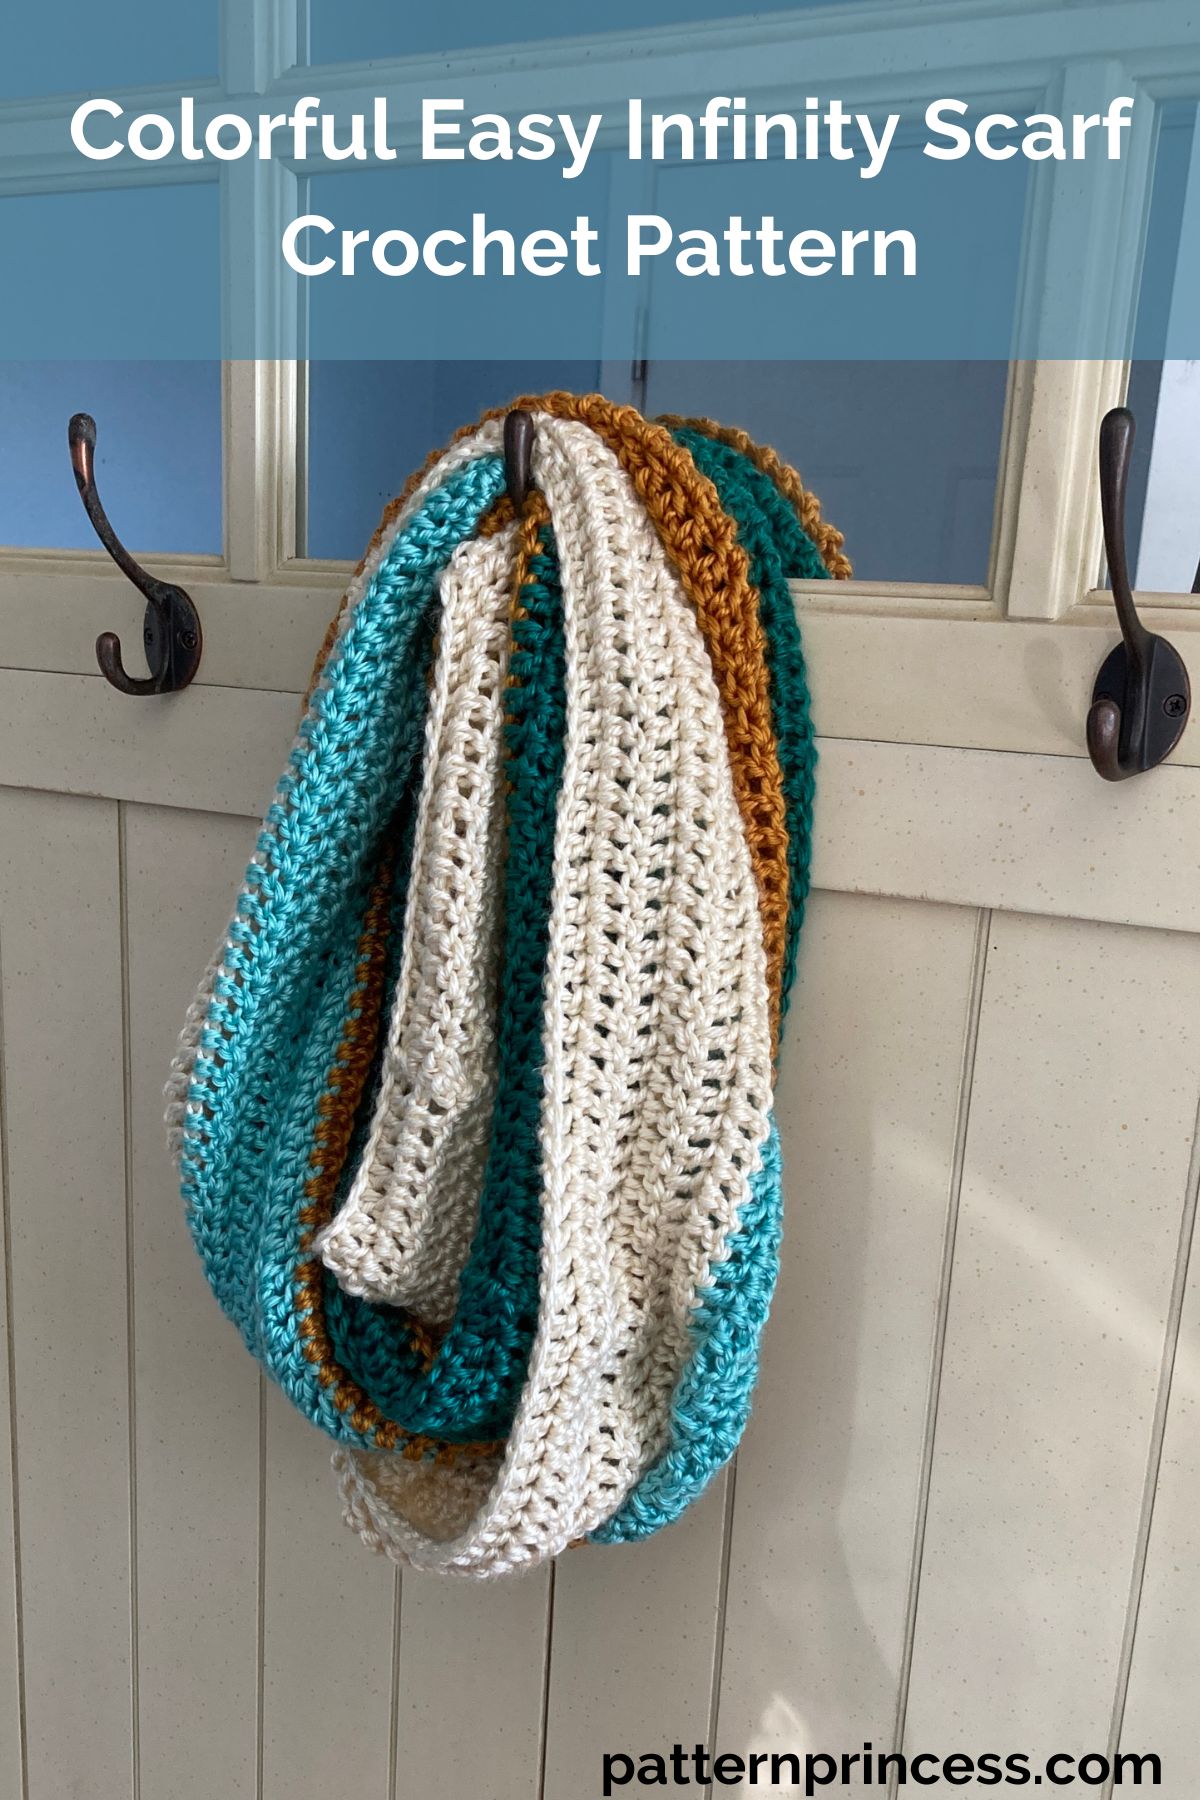 Colorful Easy Infinity Scarf Crochet Pattern